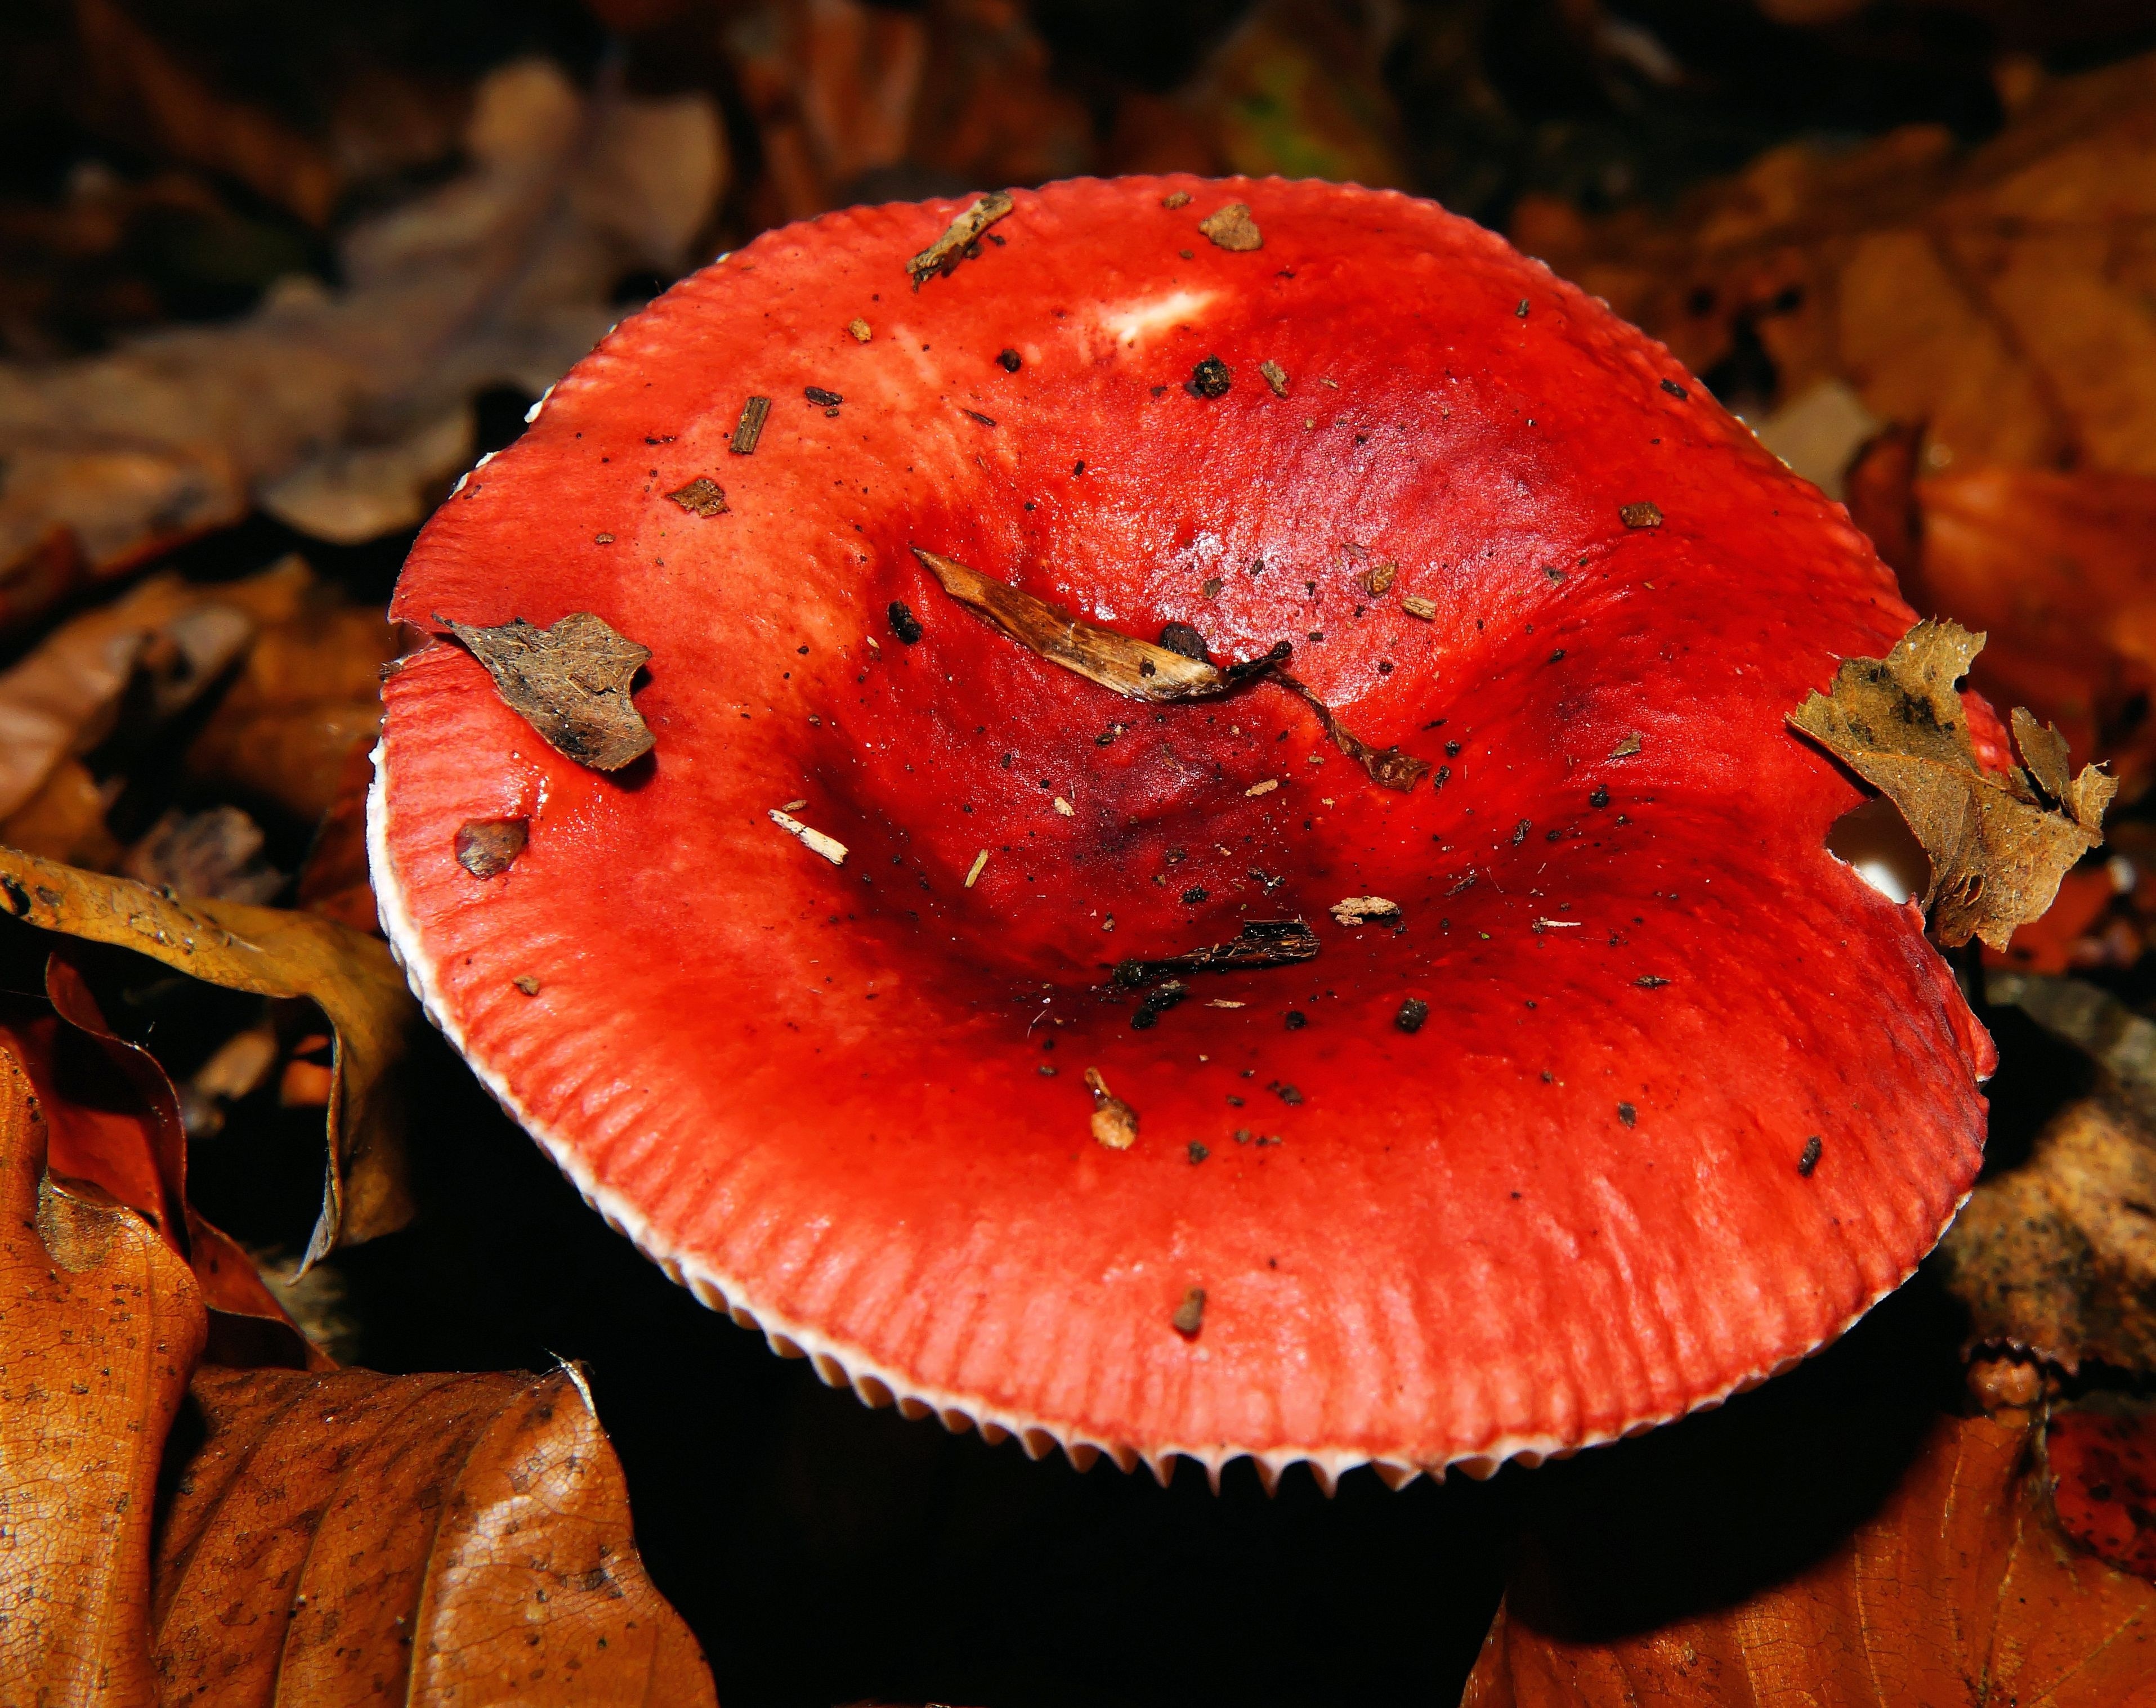 Mushroom, Fly Agaric, Forest, food and drink, red